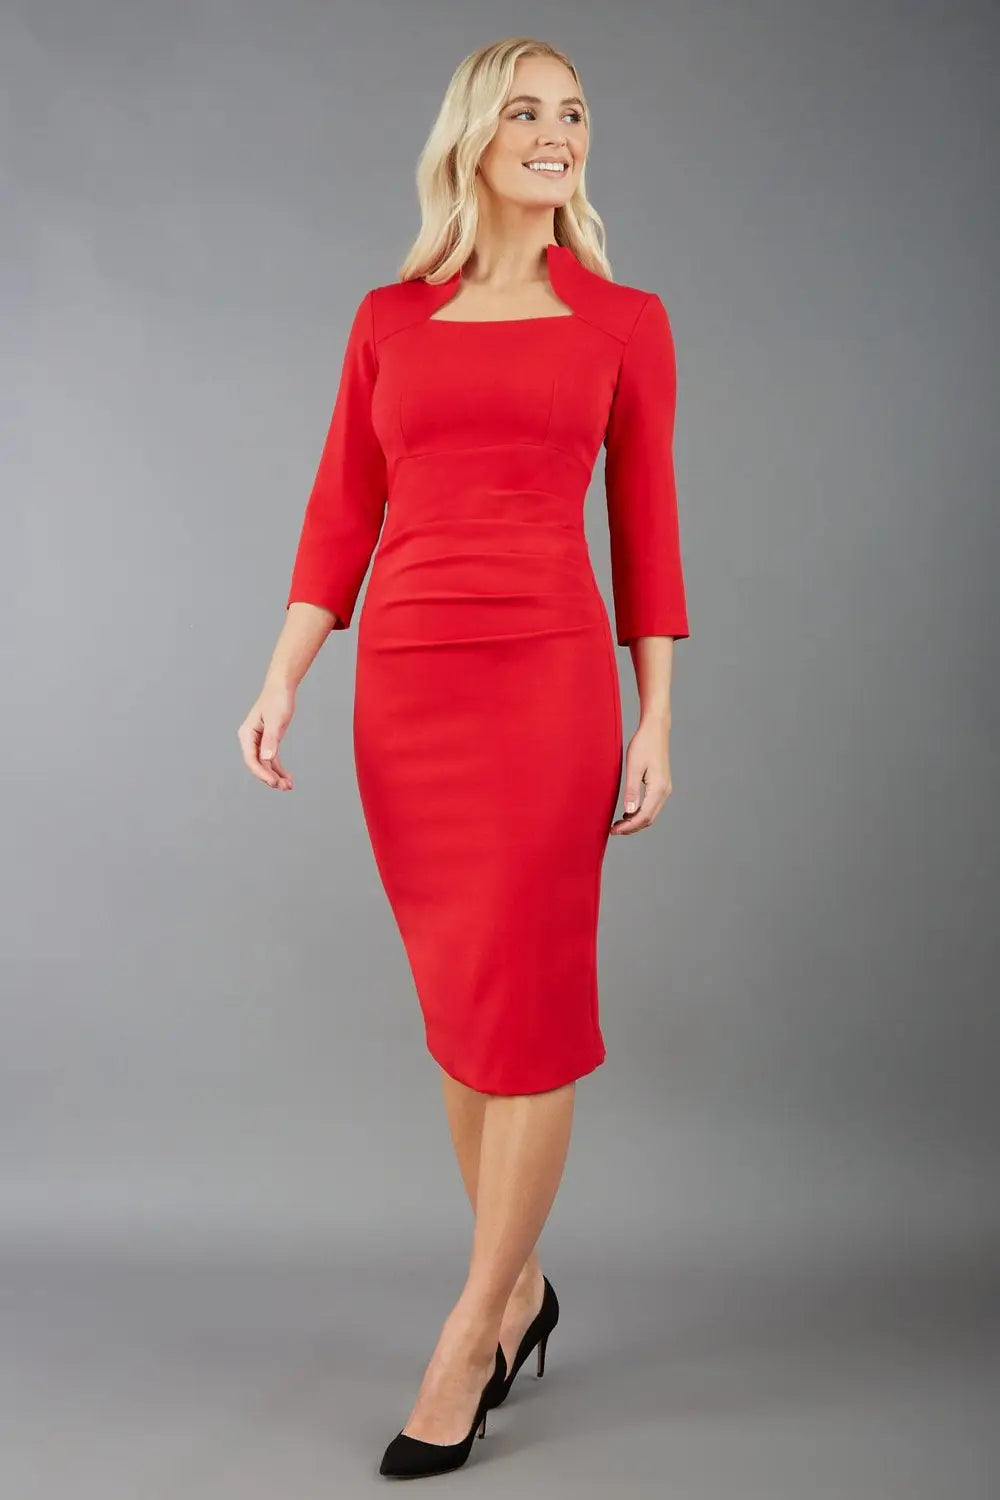 Women' Business Plaza Dress - Scarlet Red NORA GARDNER | OFFICIAL STORE for work and office